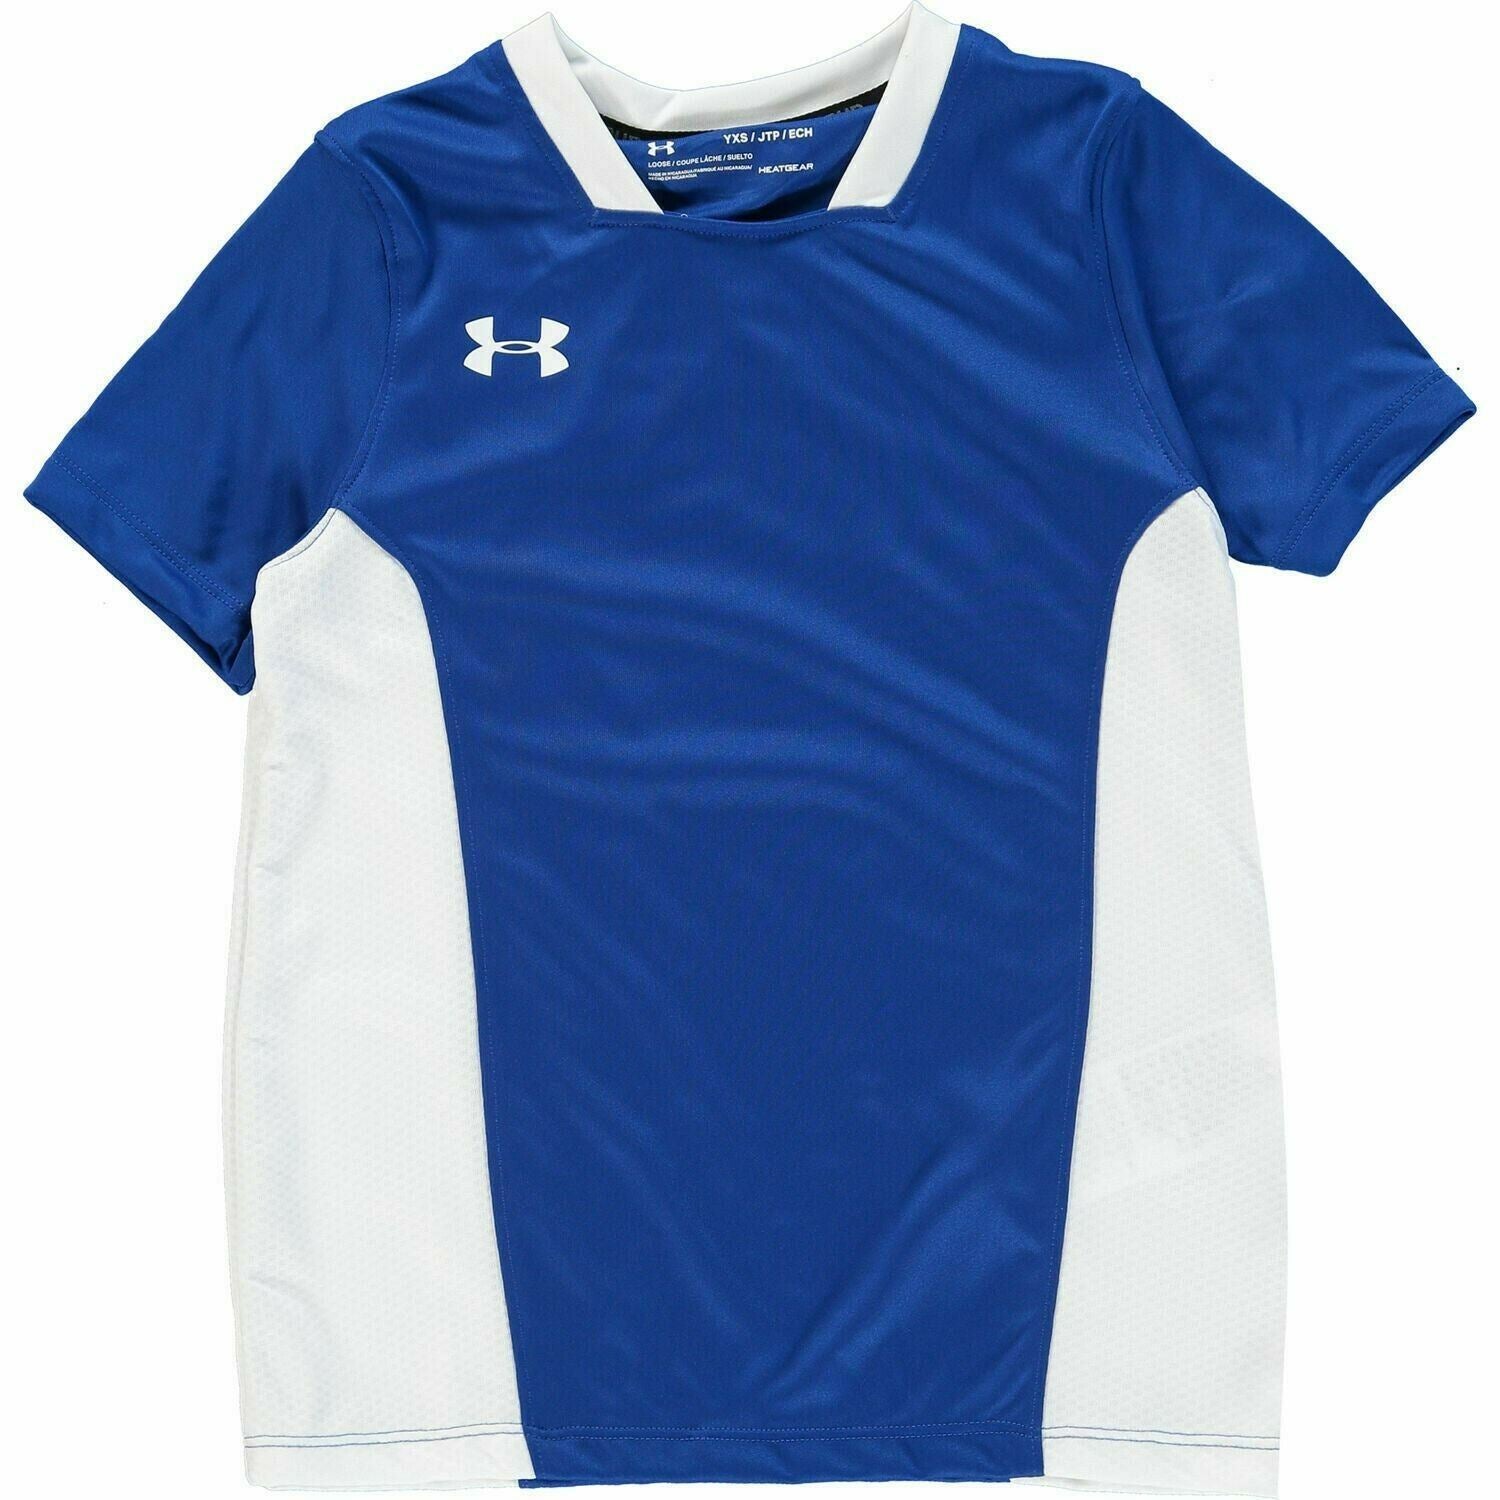 UNDER ARMOUR Boys' CHALLENGER ActiveWear Training T-shirt Top, Blue size 8 years